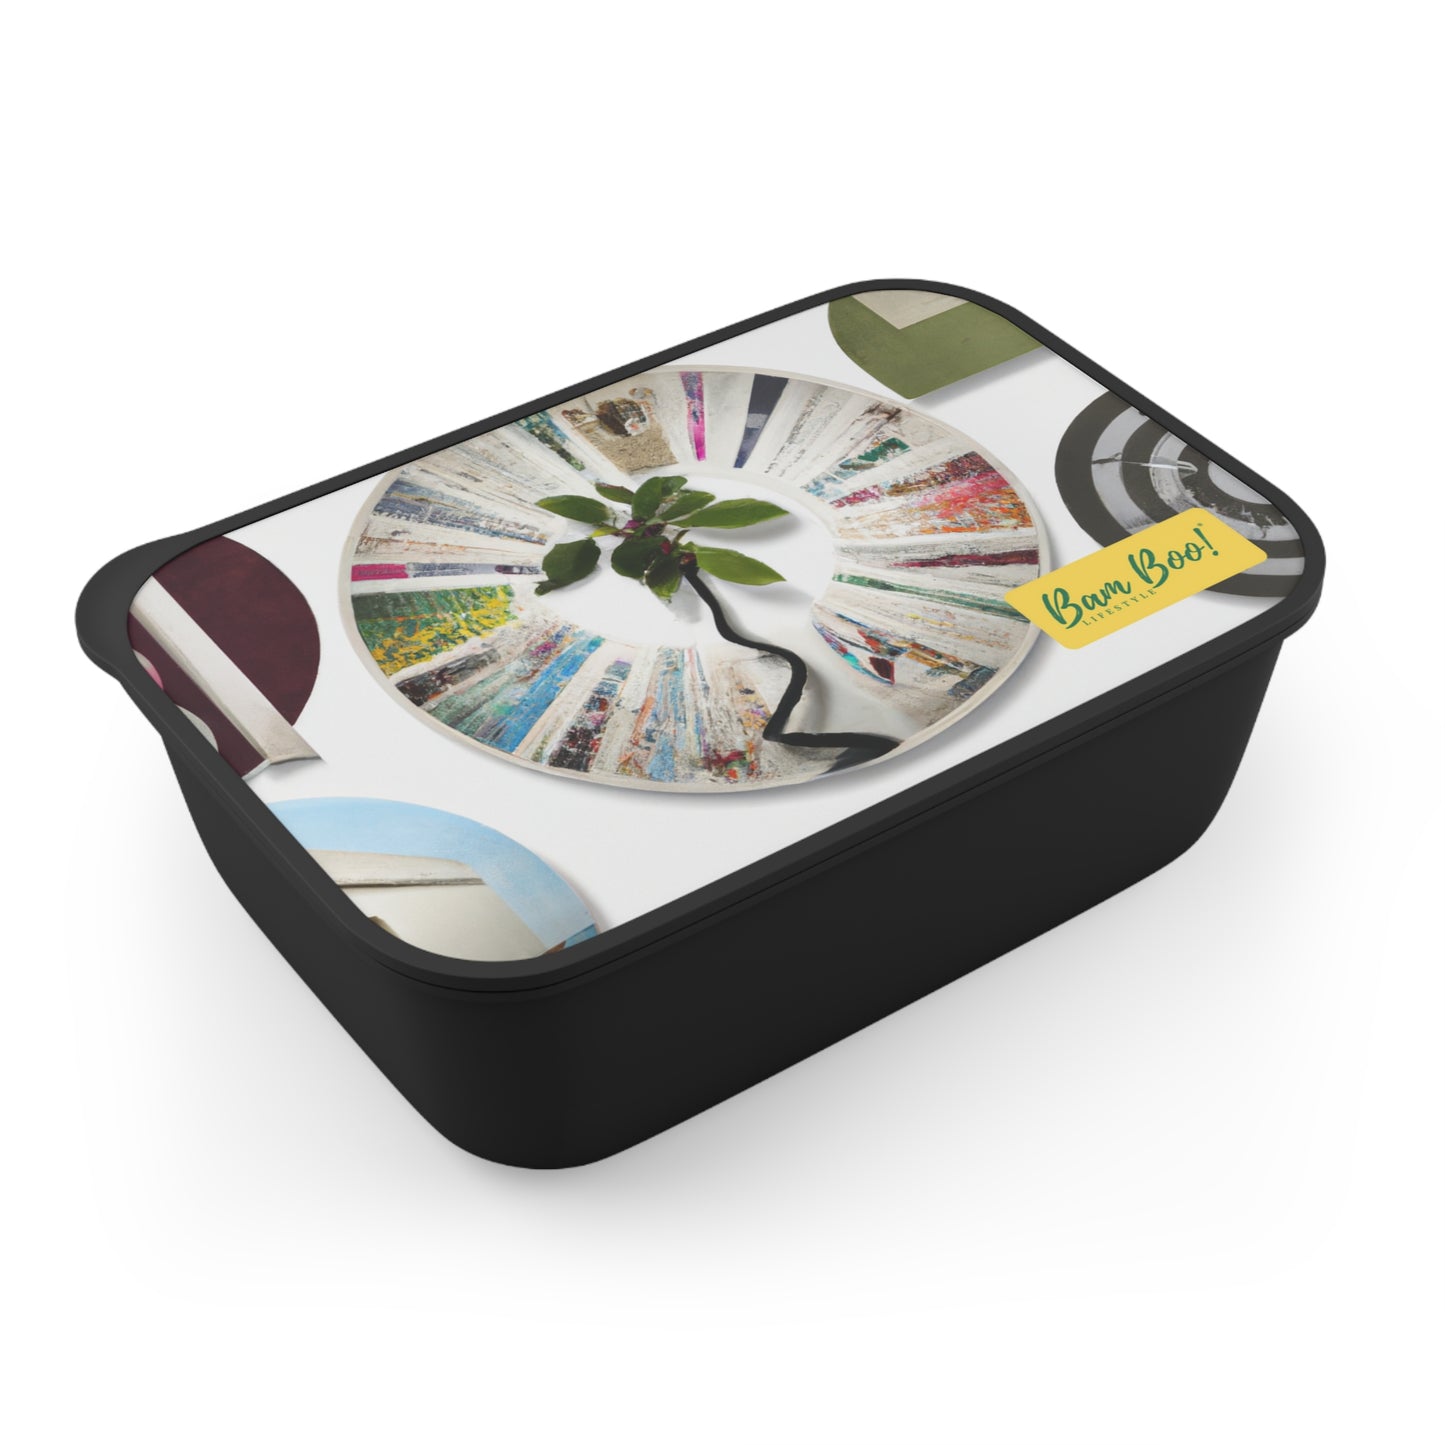 "Jigsaw of Imagination: A Creative Visual Collage" - Bam Boo! Lifestyle Eco-friendly PLA Bento Box with Band and Utensils